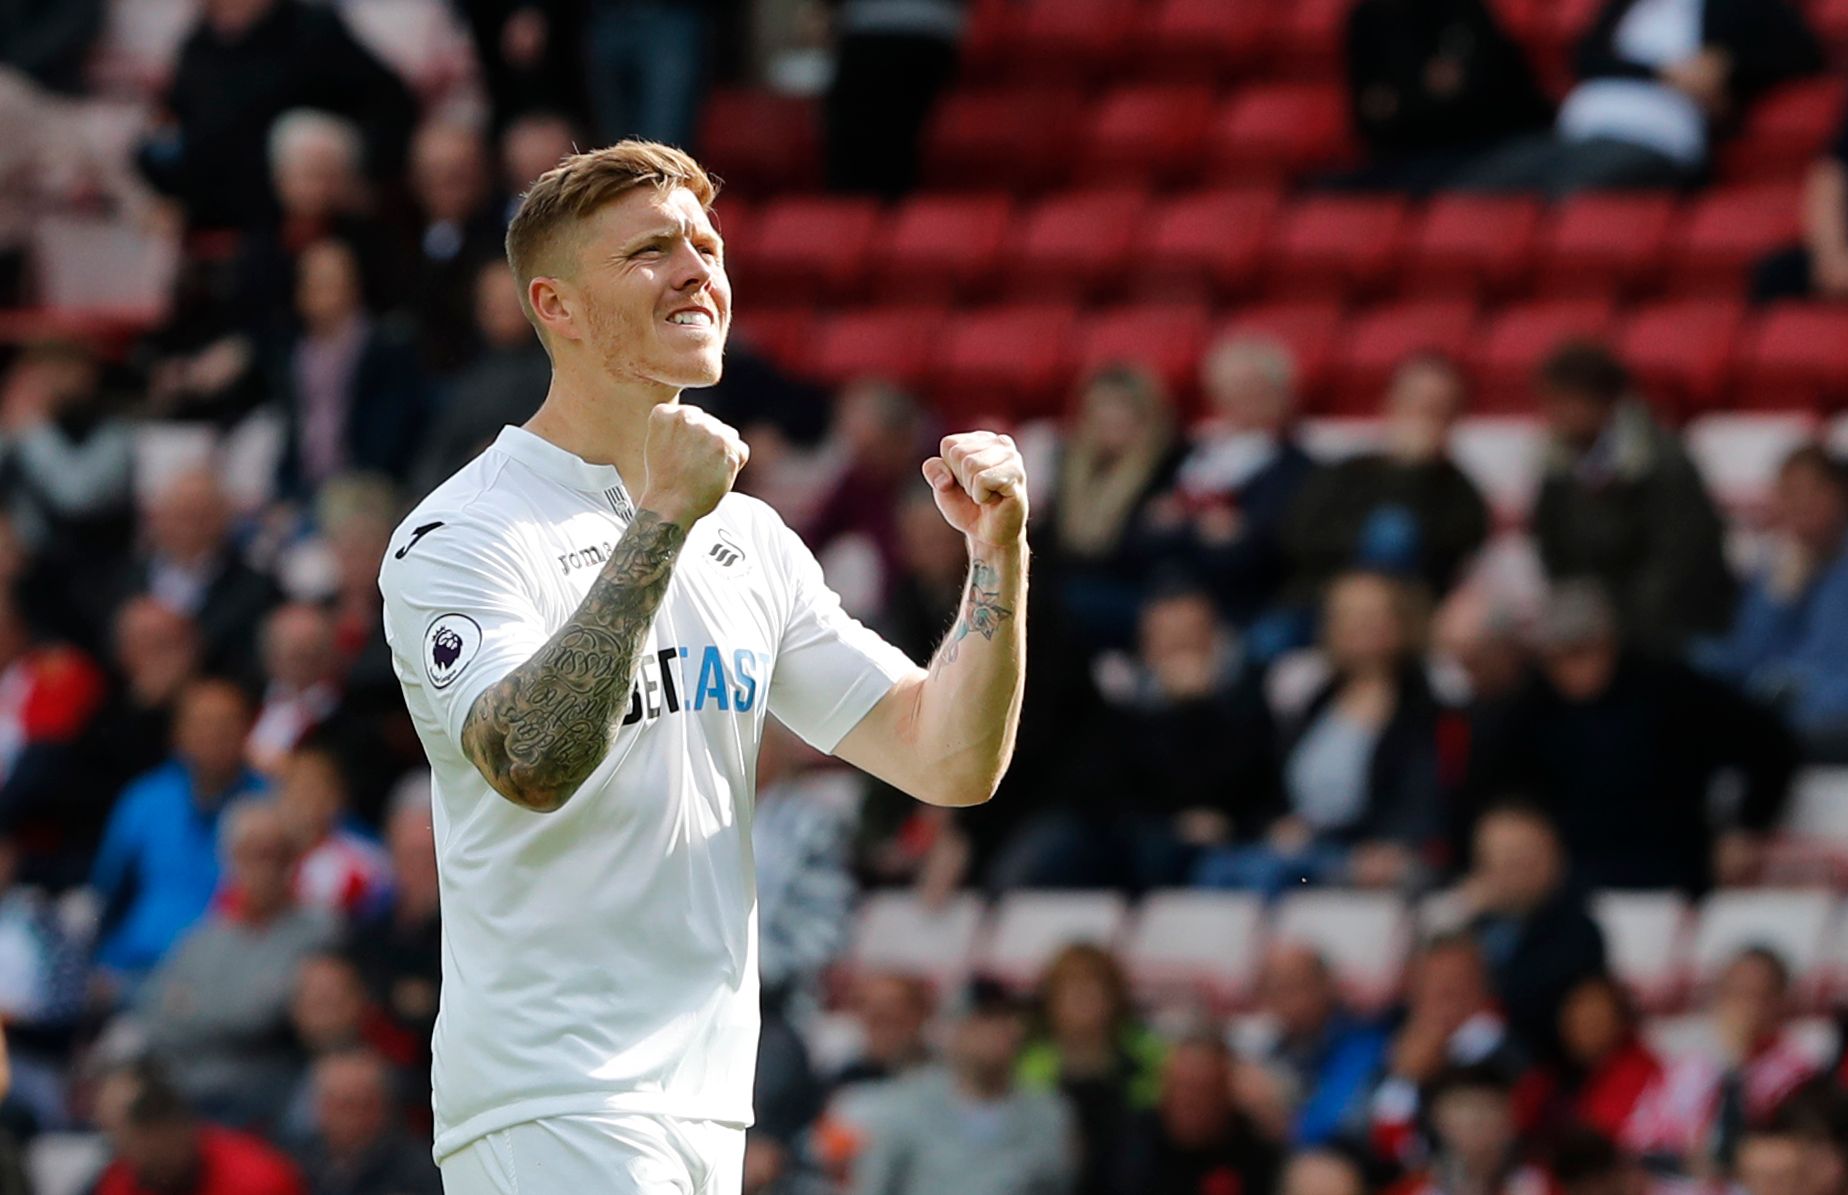 Britain Football Soccer - Sunderland v Swansea City - Premier League - Stadium of Light - 13/5/17 Swansea City's Alfie Mawson celebrates after the match  Reuters / Russell Cheyne Livepic EDITORIAL USE ONLY. No use with unauthorized audio, video, data, fixture lists, club/league logos or 